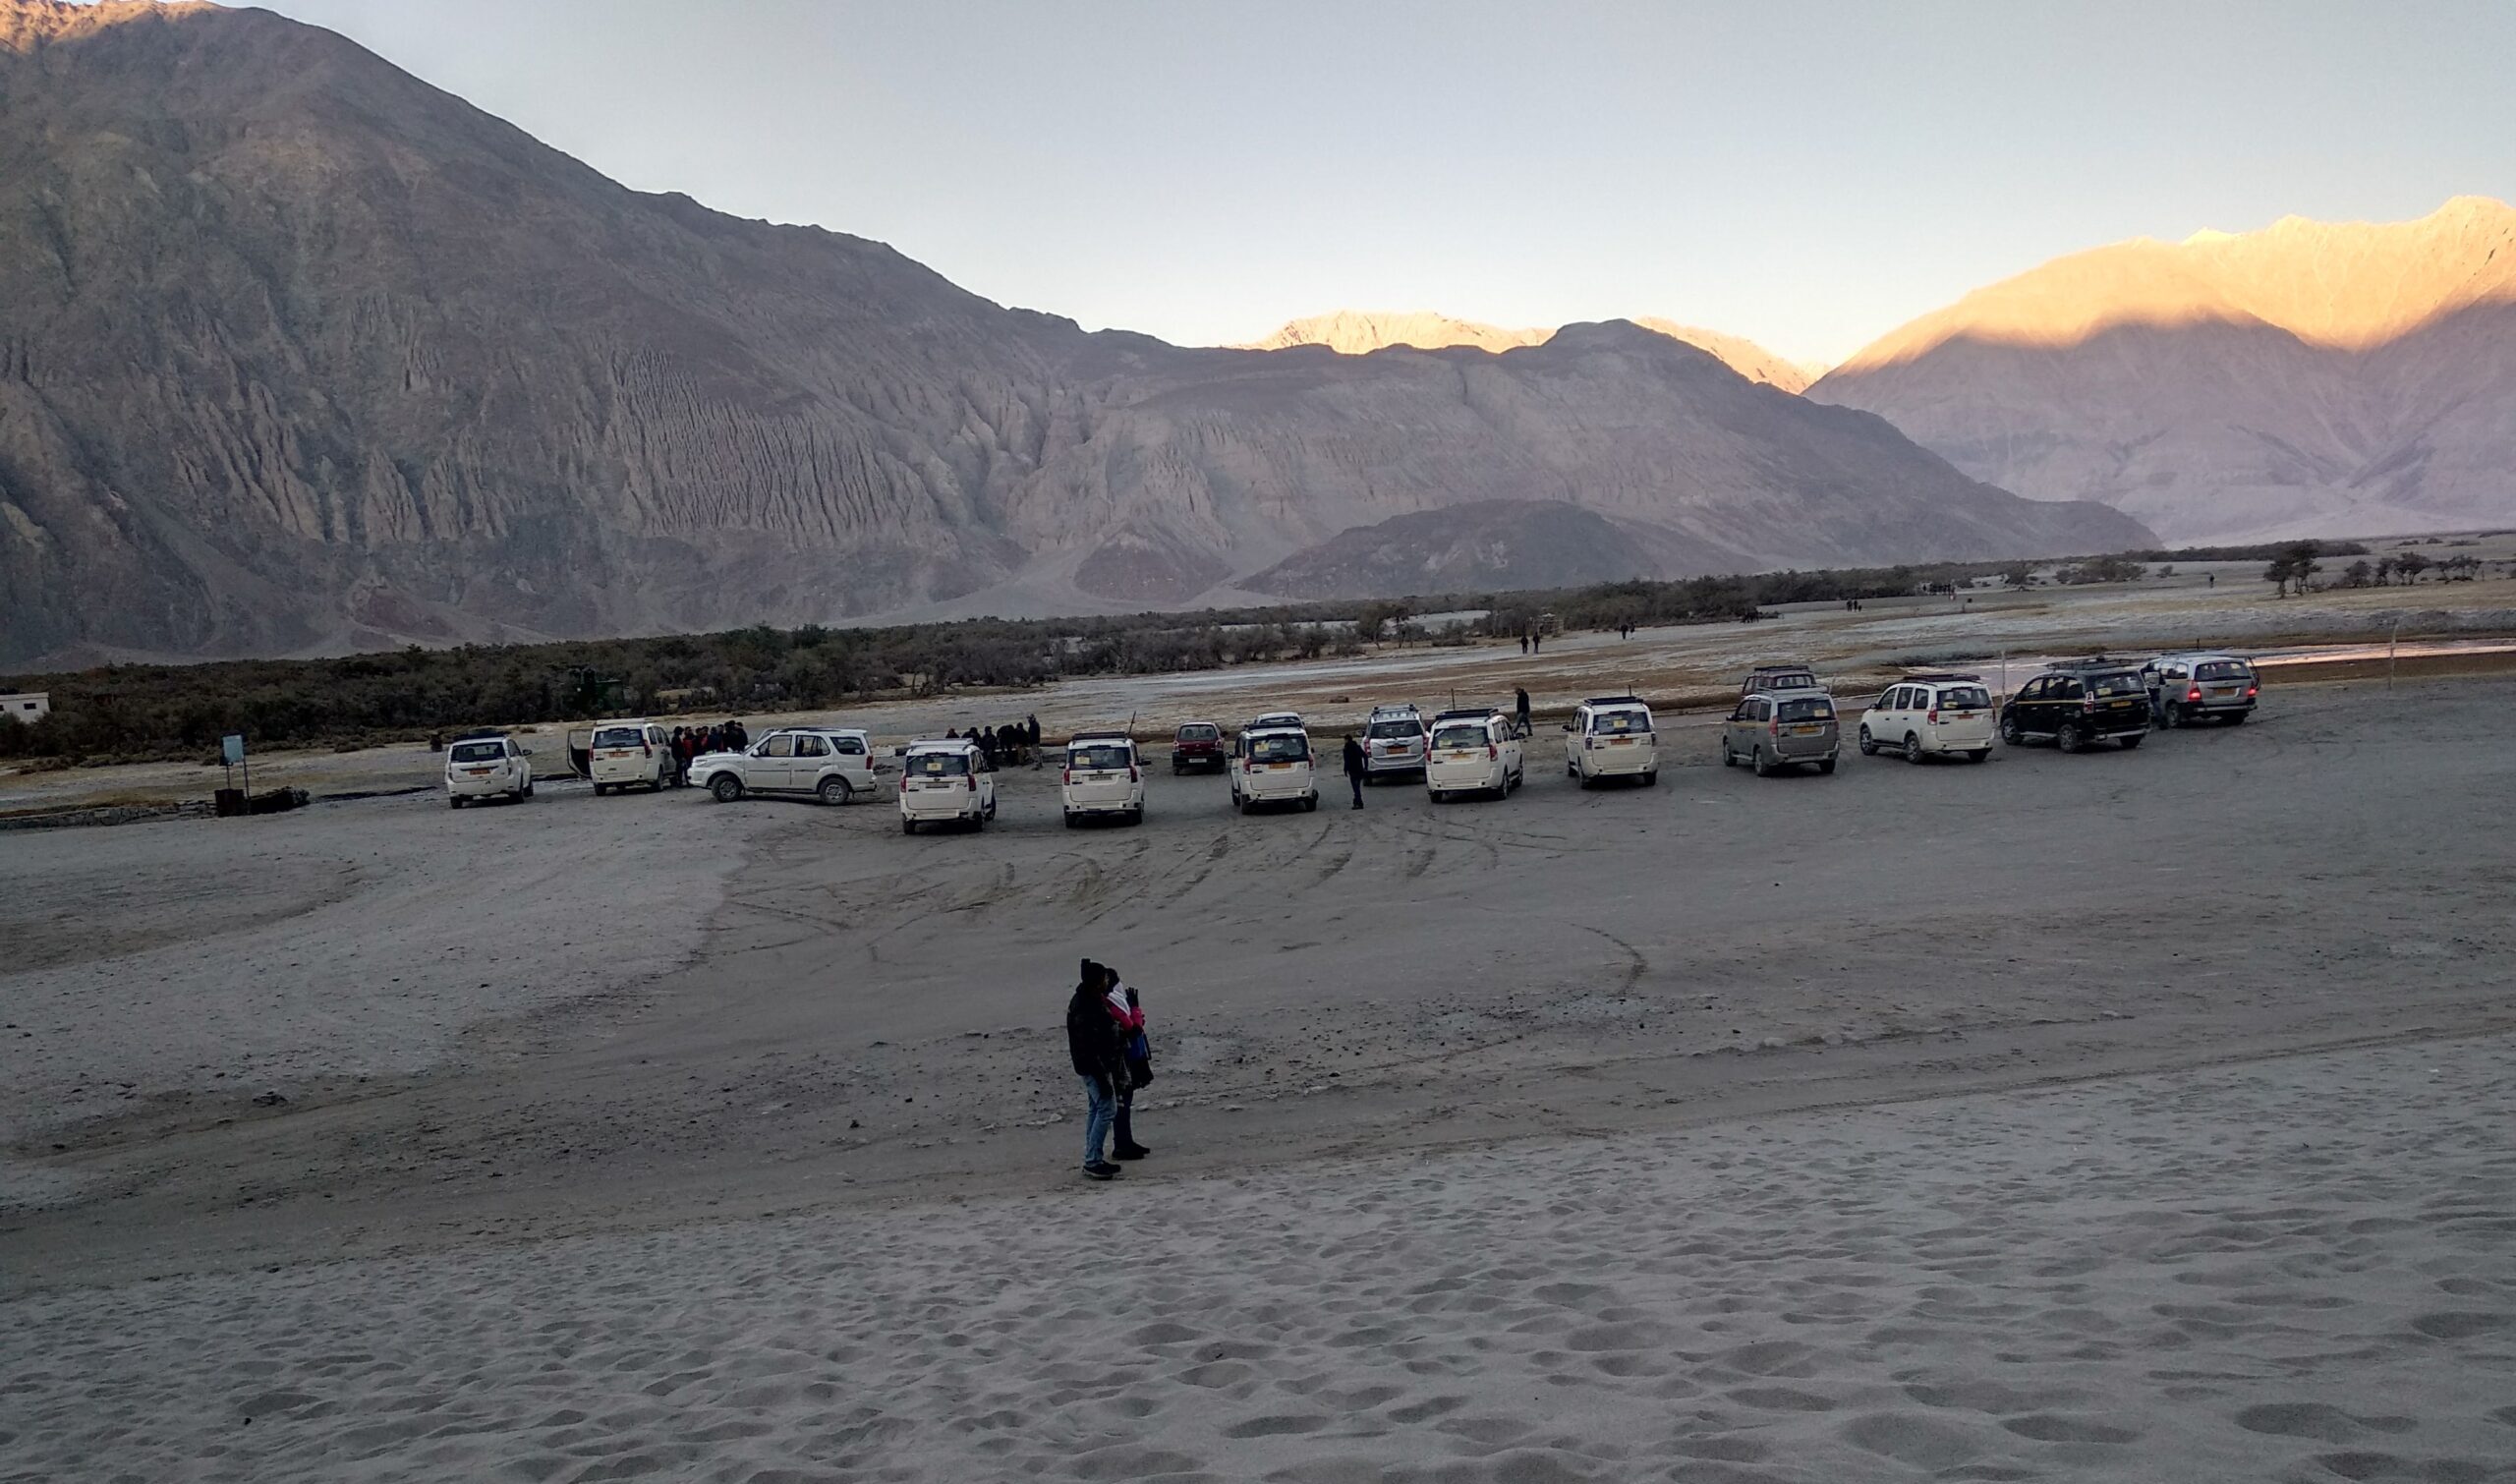 Nubra Valley- India's Only Cold Desert 